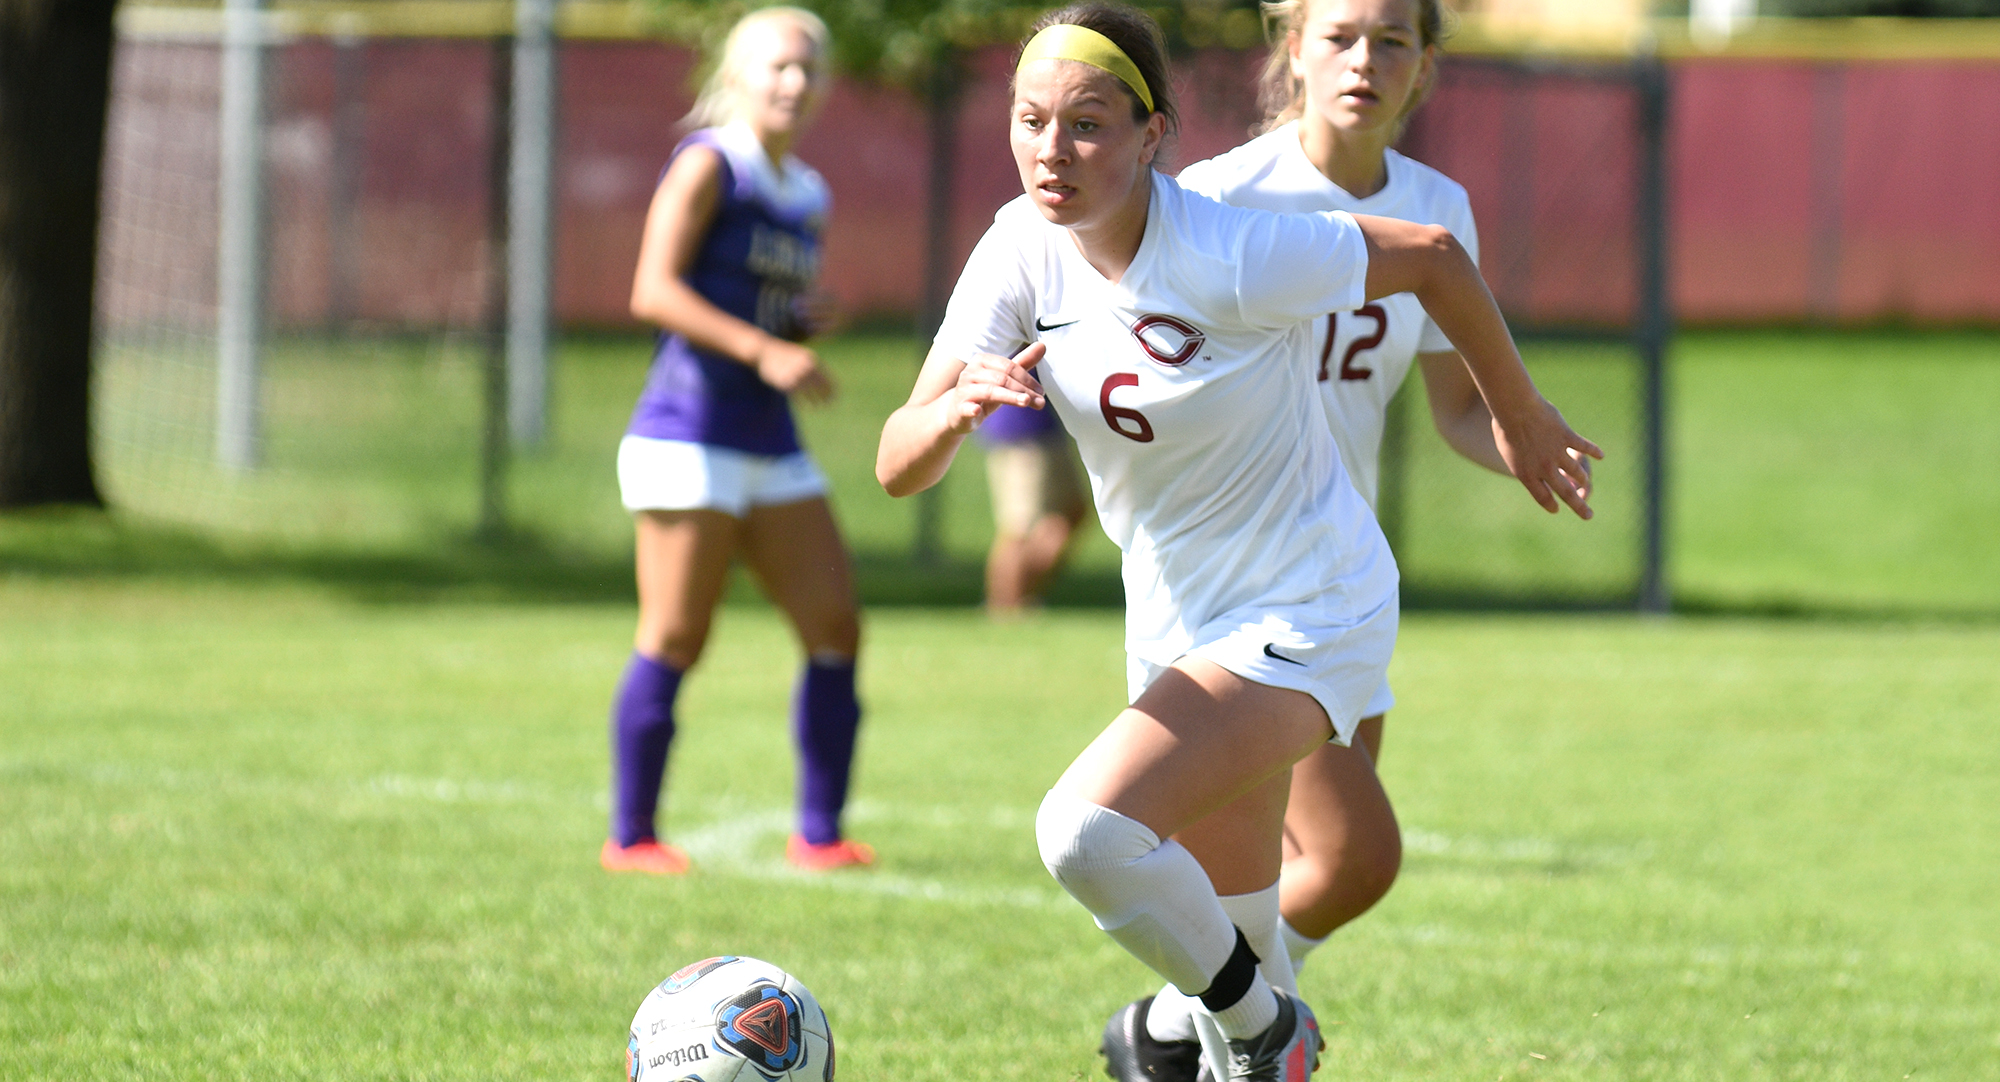 Junior Samantha Holmberg scored her second goal of the season in the Cobbers' 6-0 win over Minn.-Morris.